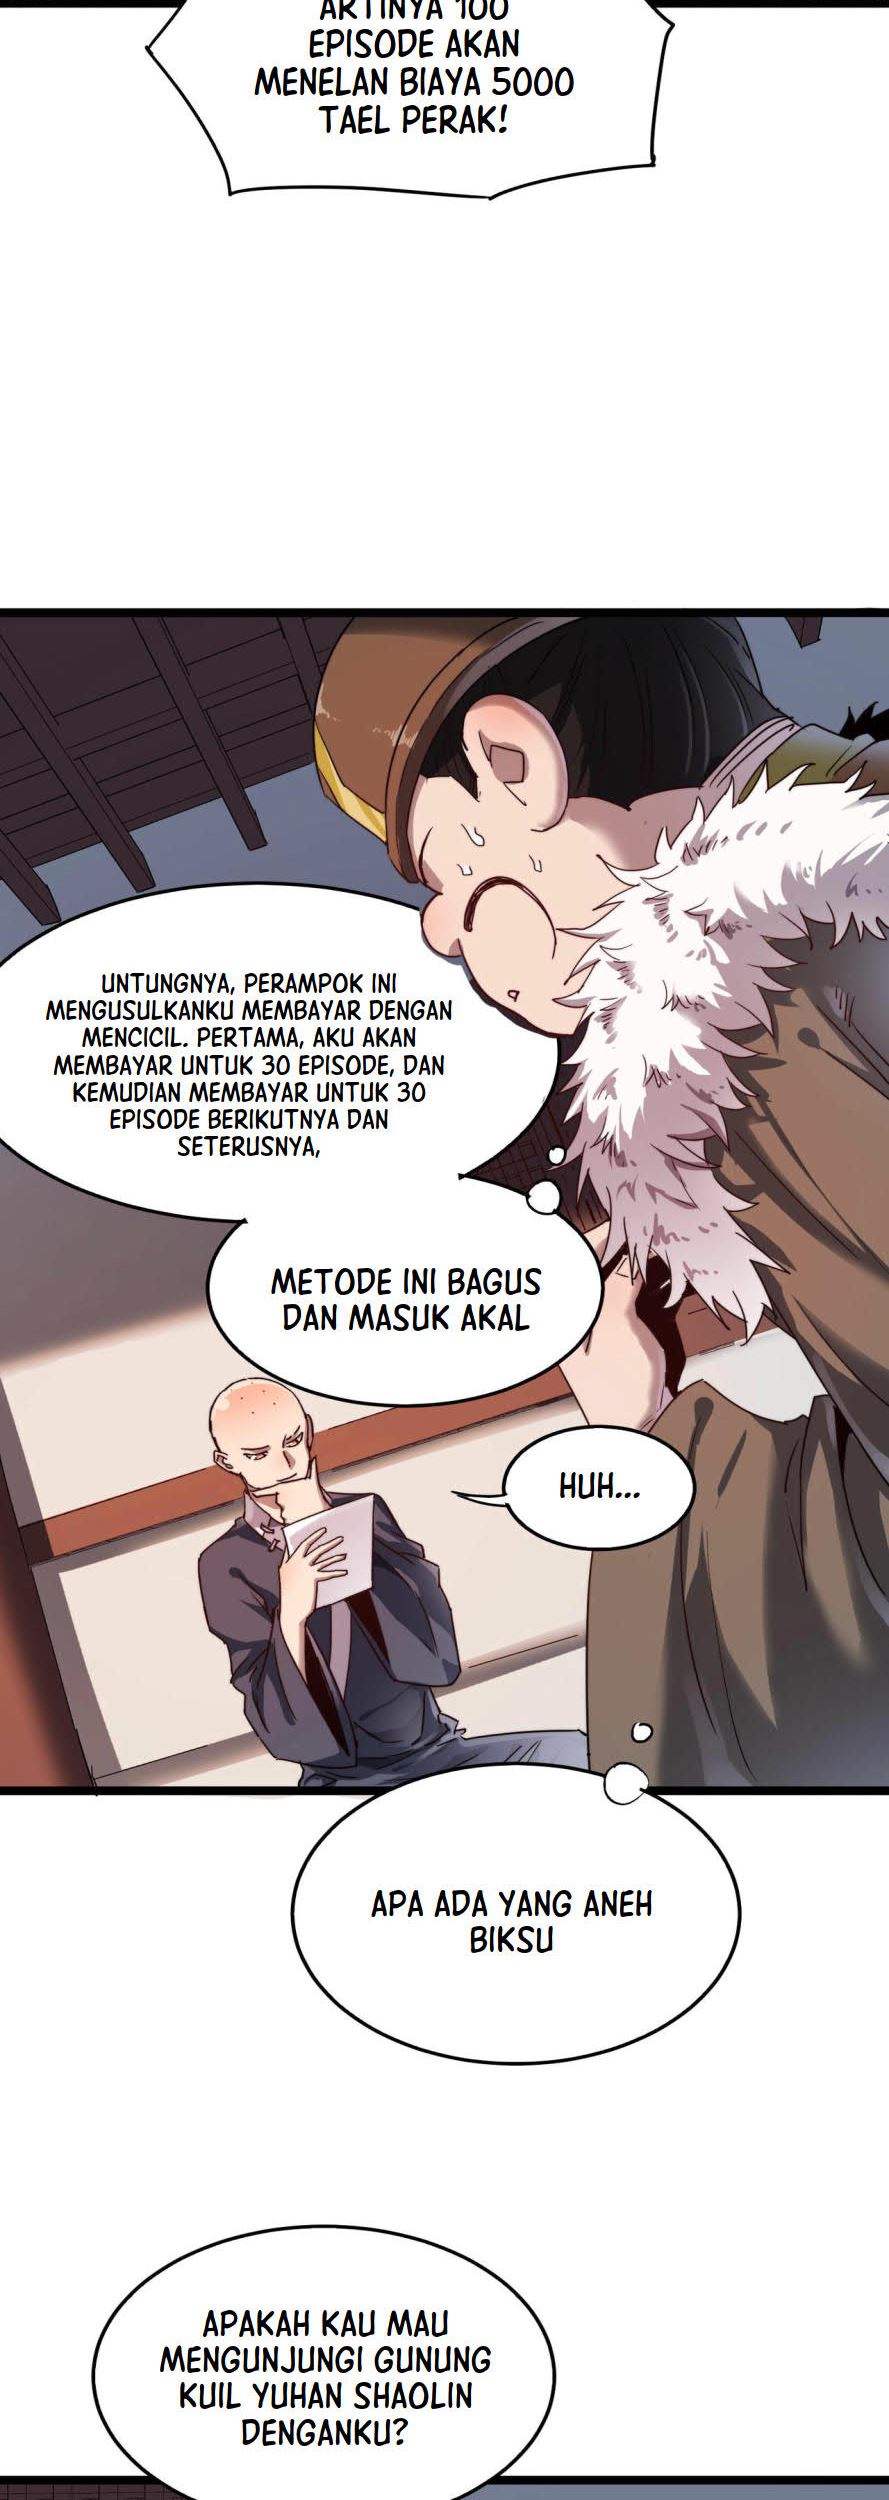 Dilarang COPAS - situs resmi www.mangacanblog.com - Komik building the strongest shaolin temple in another world 007 - chapter 7 8 Indonesia building the strongest shaolin temple in another world 007 - chapter 7 Terbaru 3|Baca Manga Komik Indonesia|Mangacan